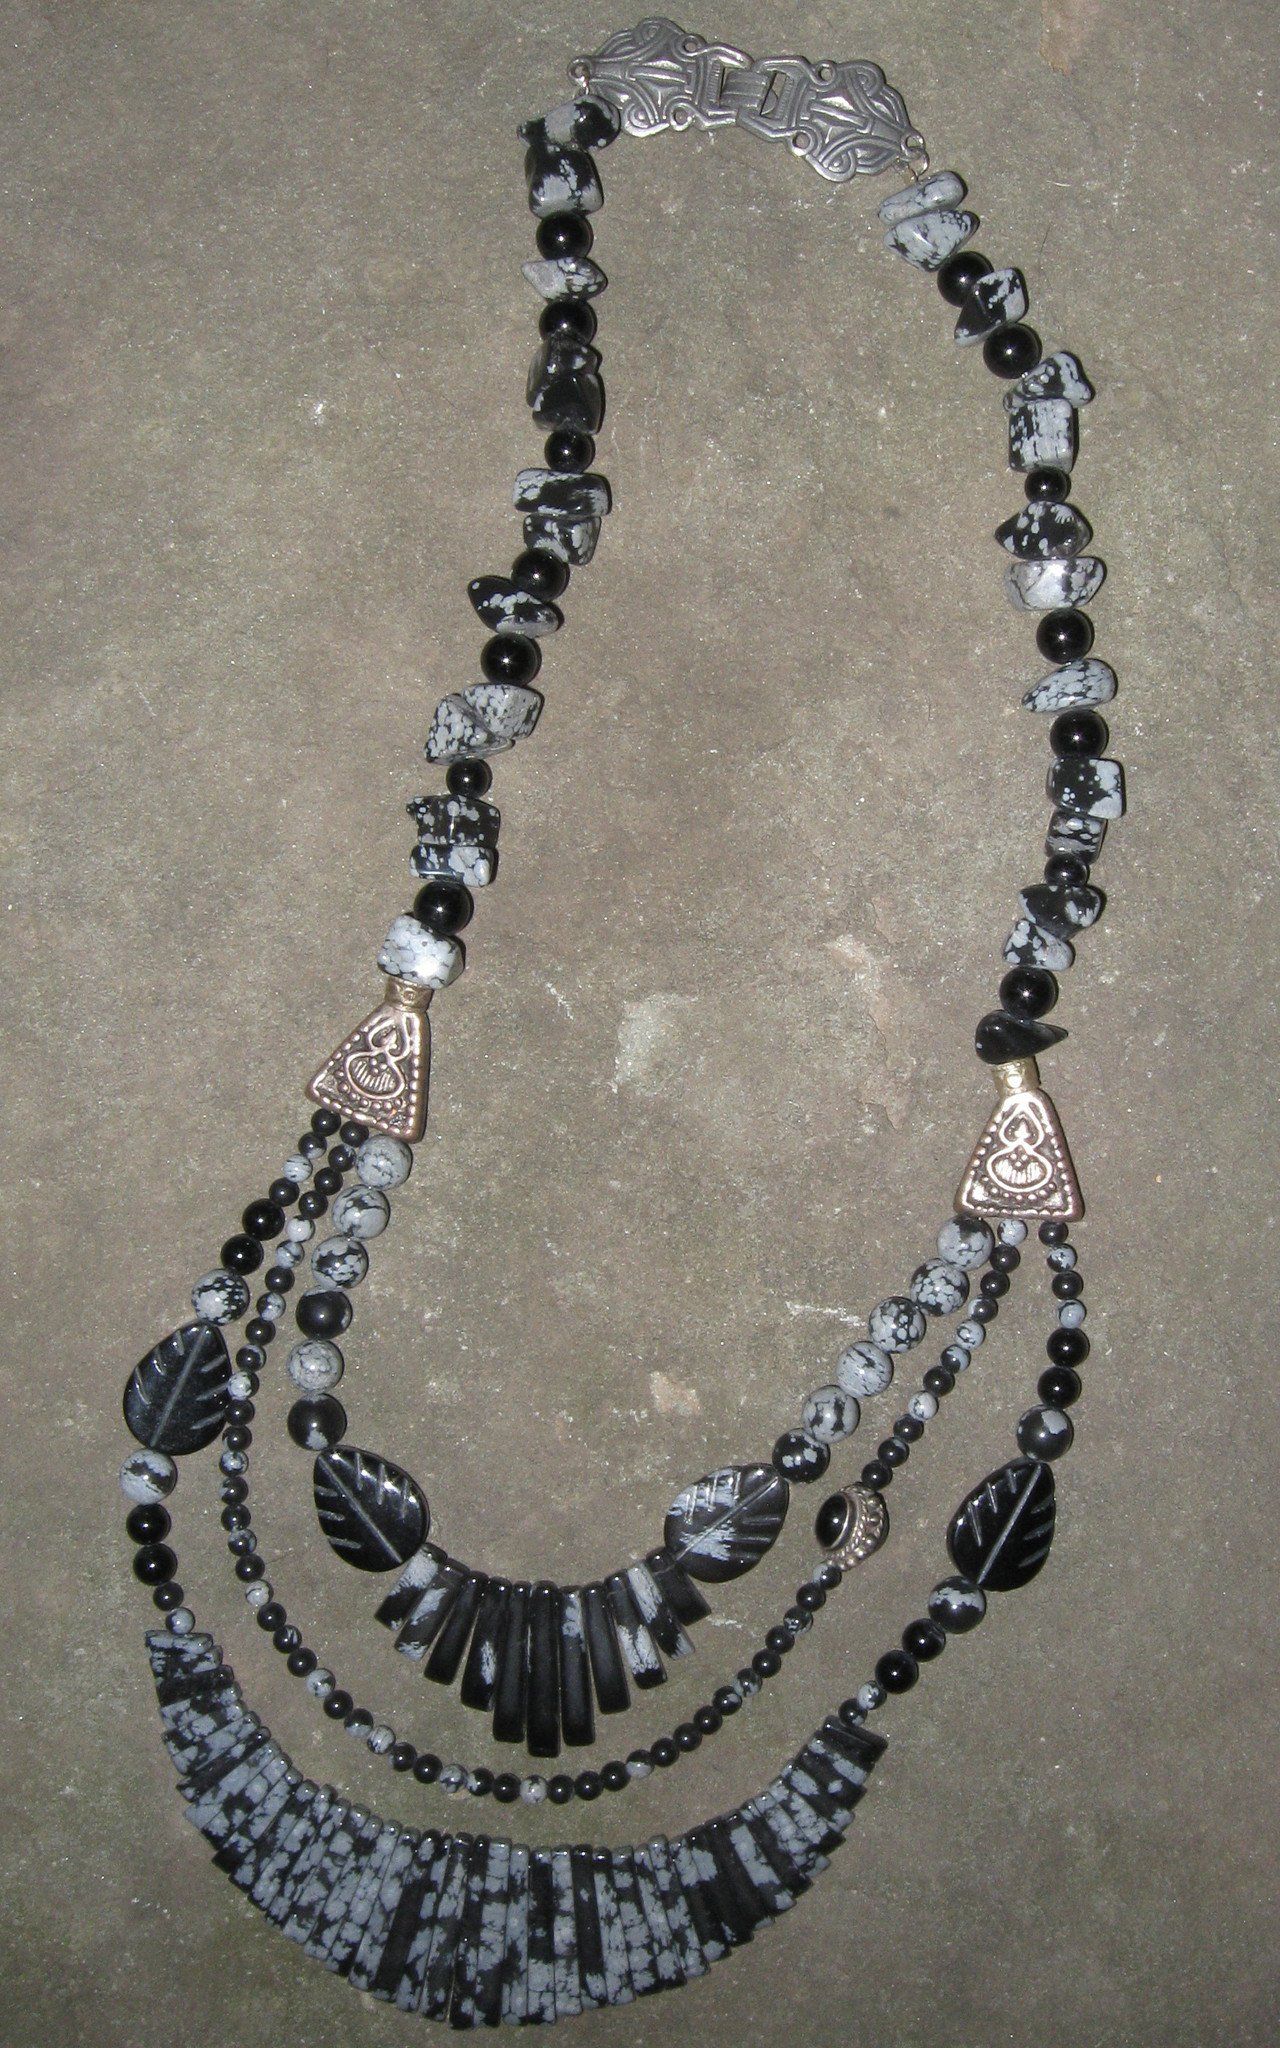 Snowflake Obsidian with Black Onyx | Of Coins & Crystals